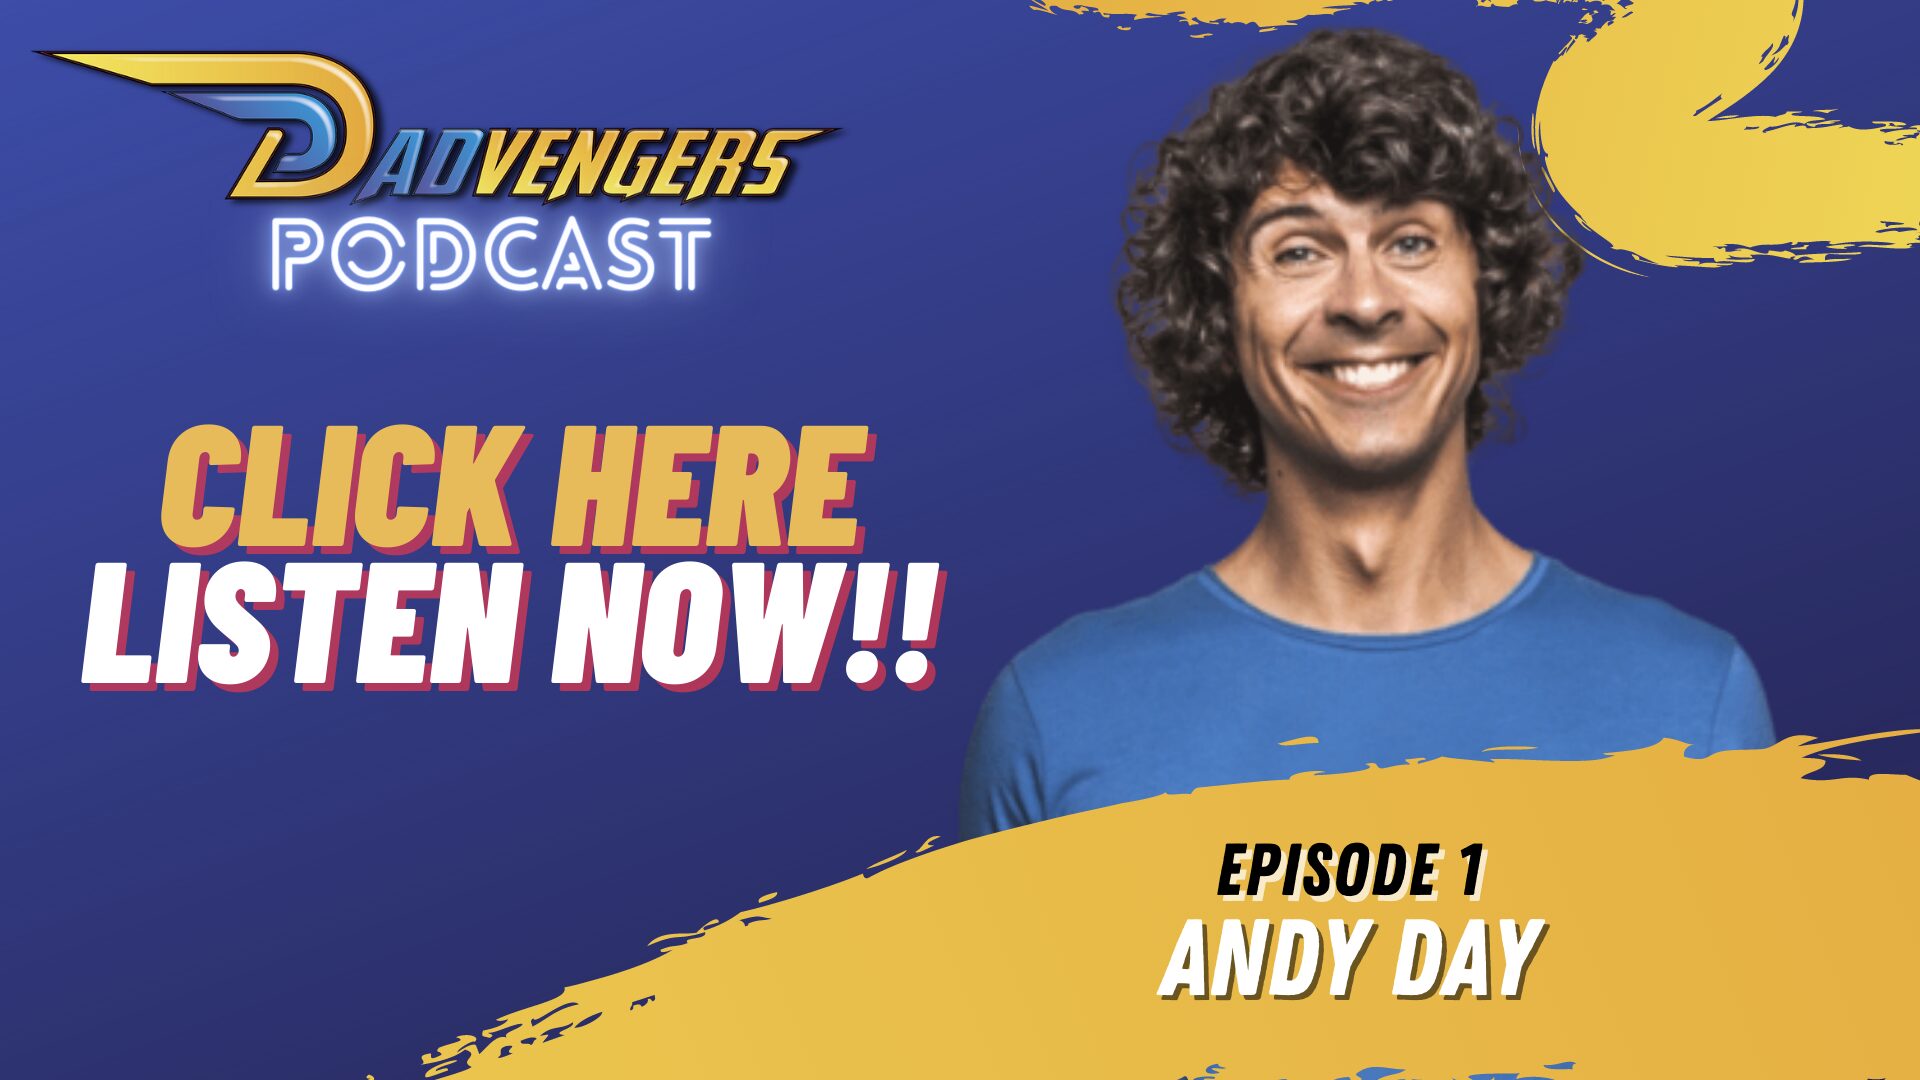 Podcast Ep 1 - Andy Day Webslider(1920x1080)